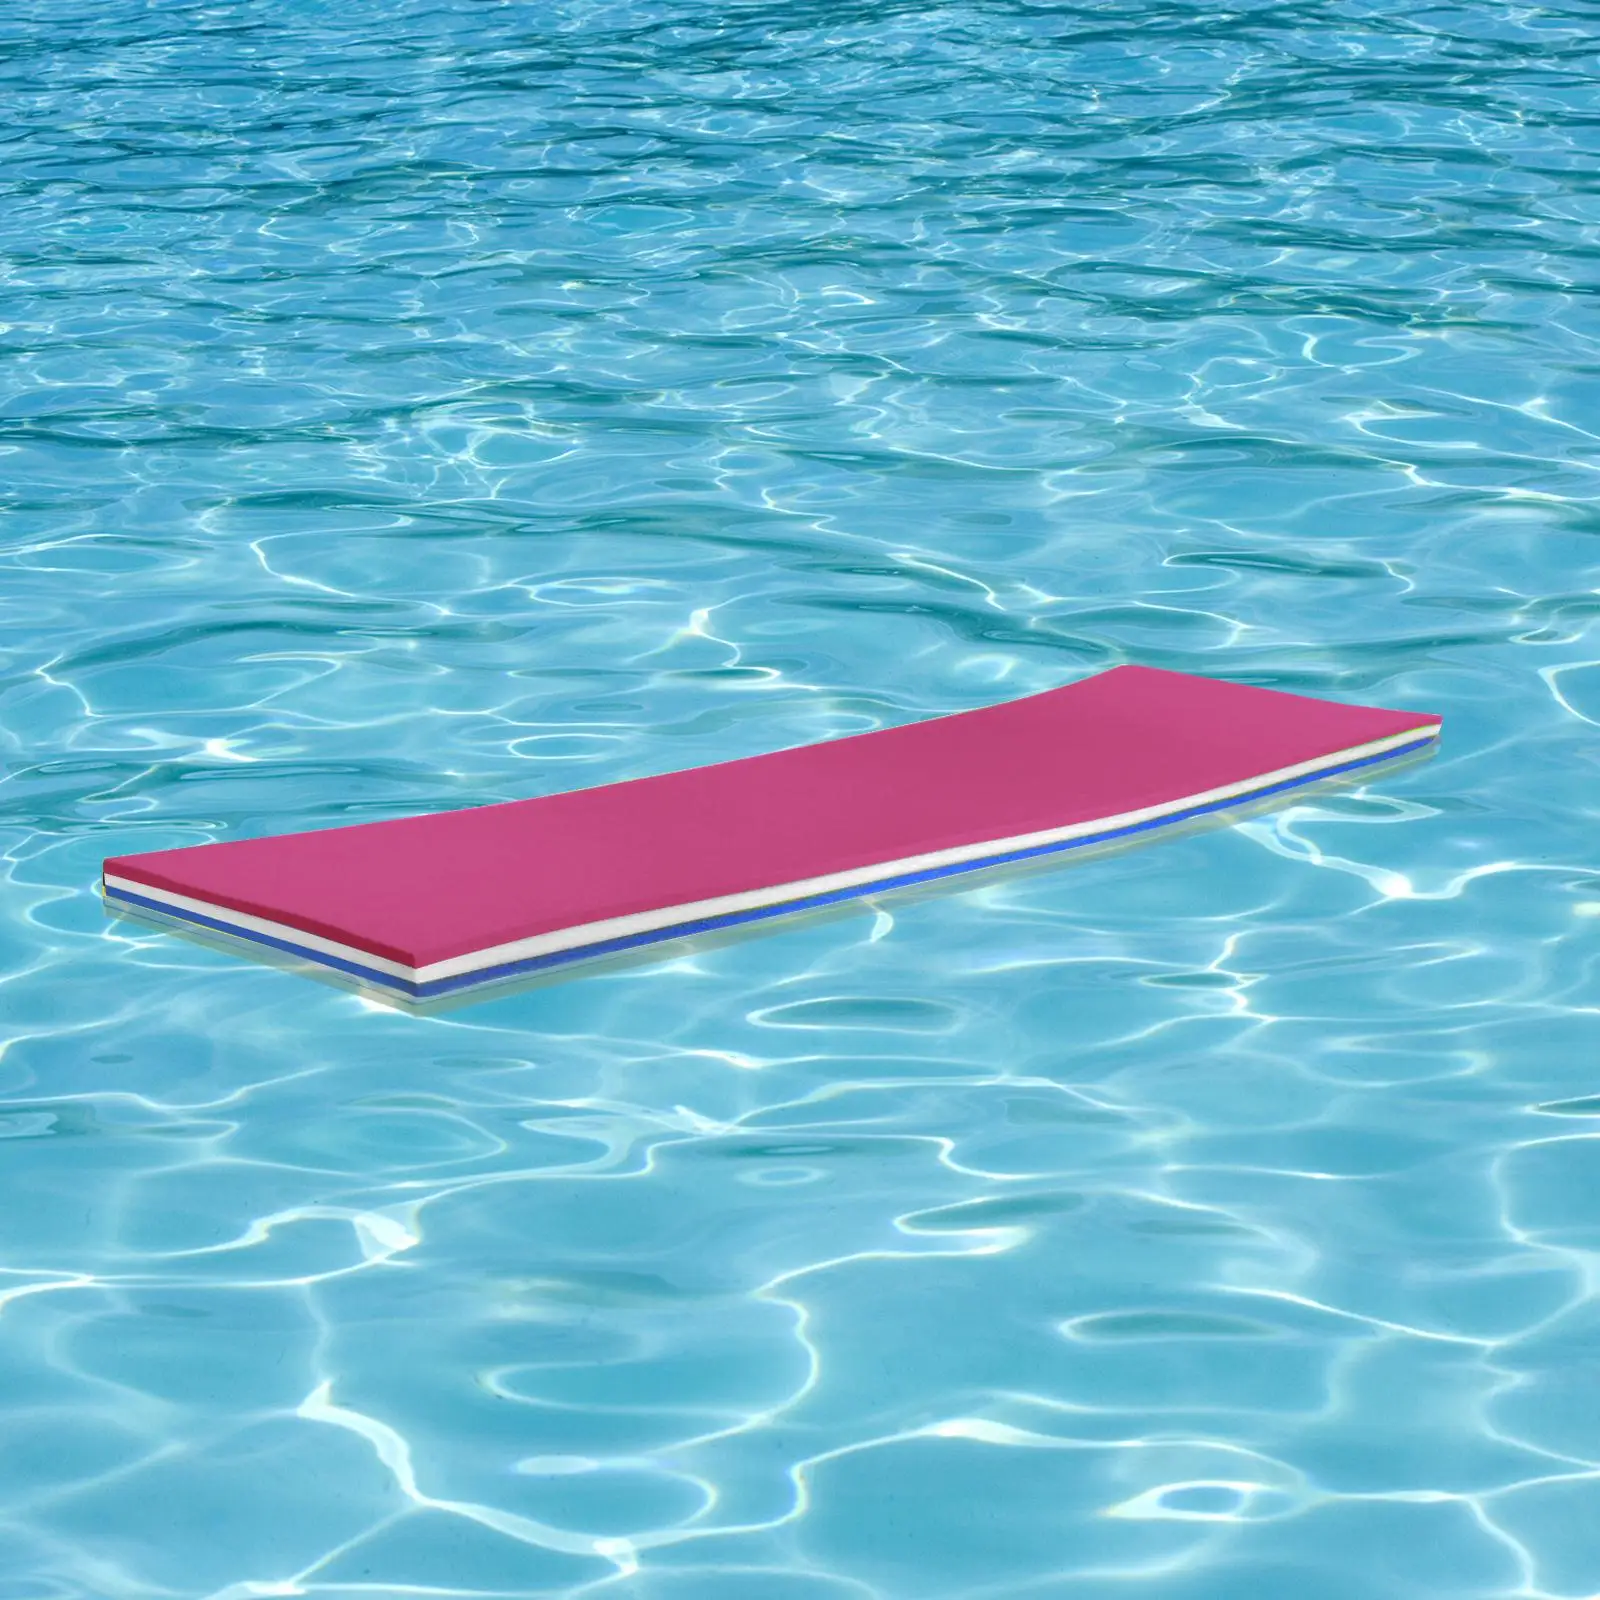 Pool Floating Water Mat 3 Layer Water Raft 110cmx40x3.2cm Smooth Surface Durable for Kids, Teens Water Bed Pink White Blue